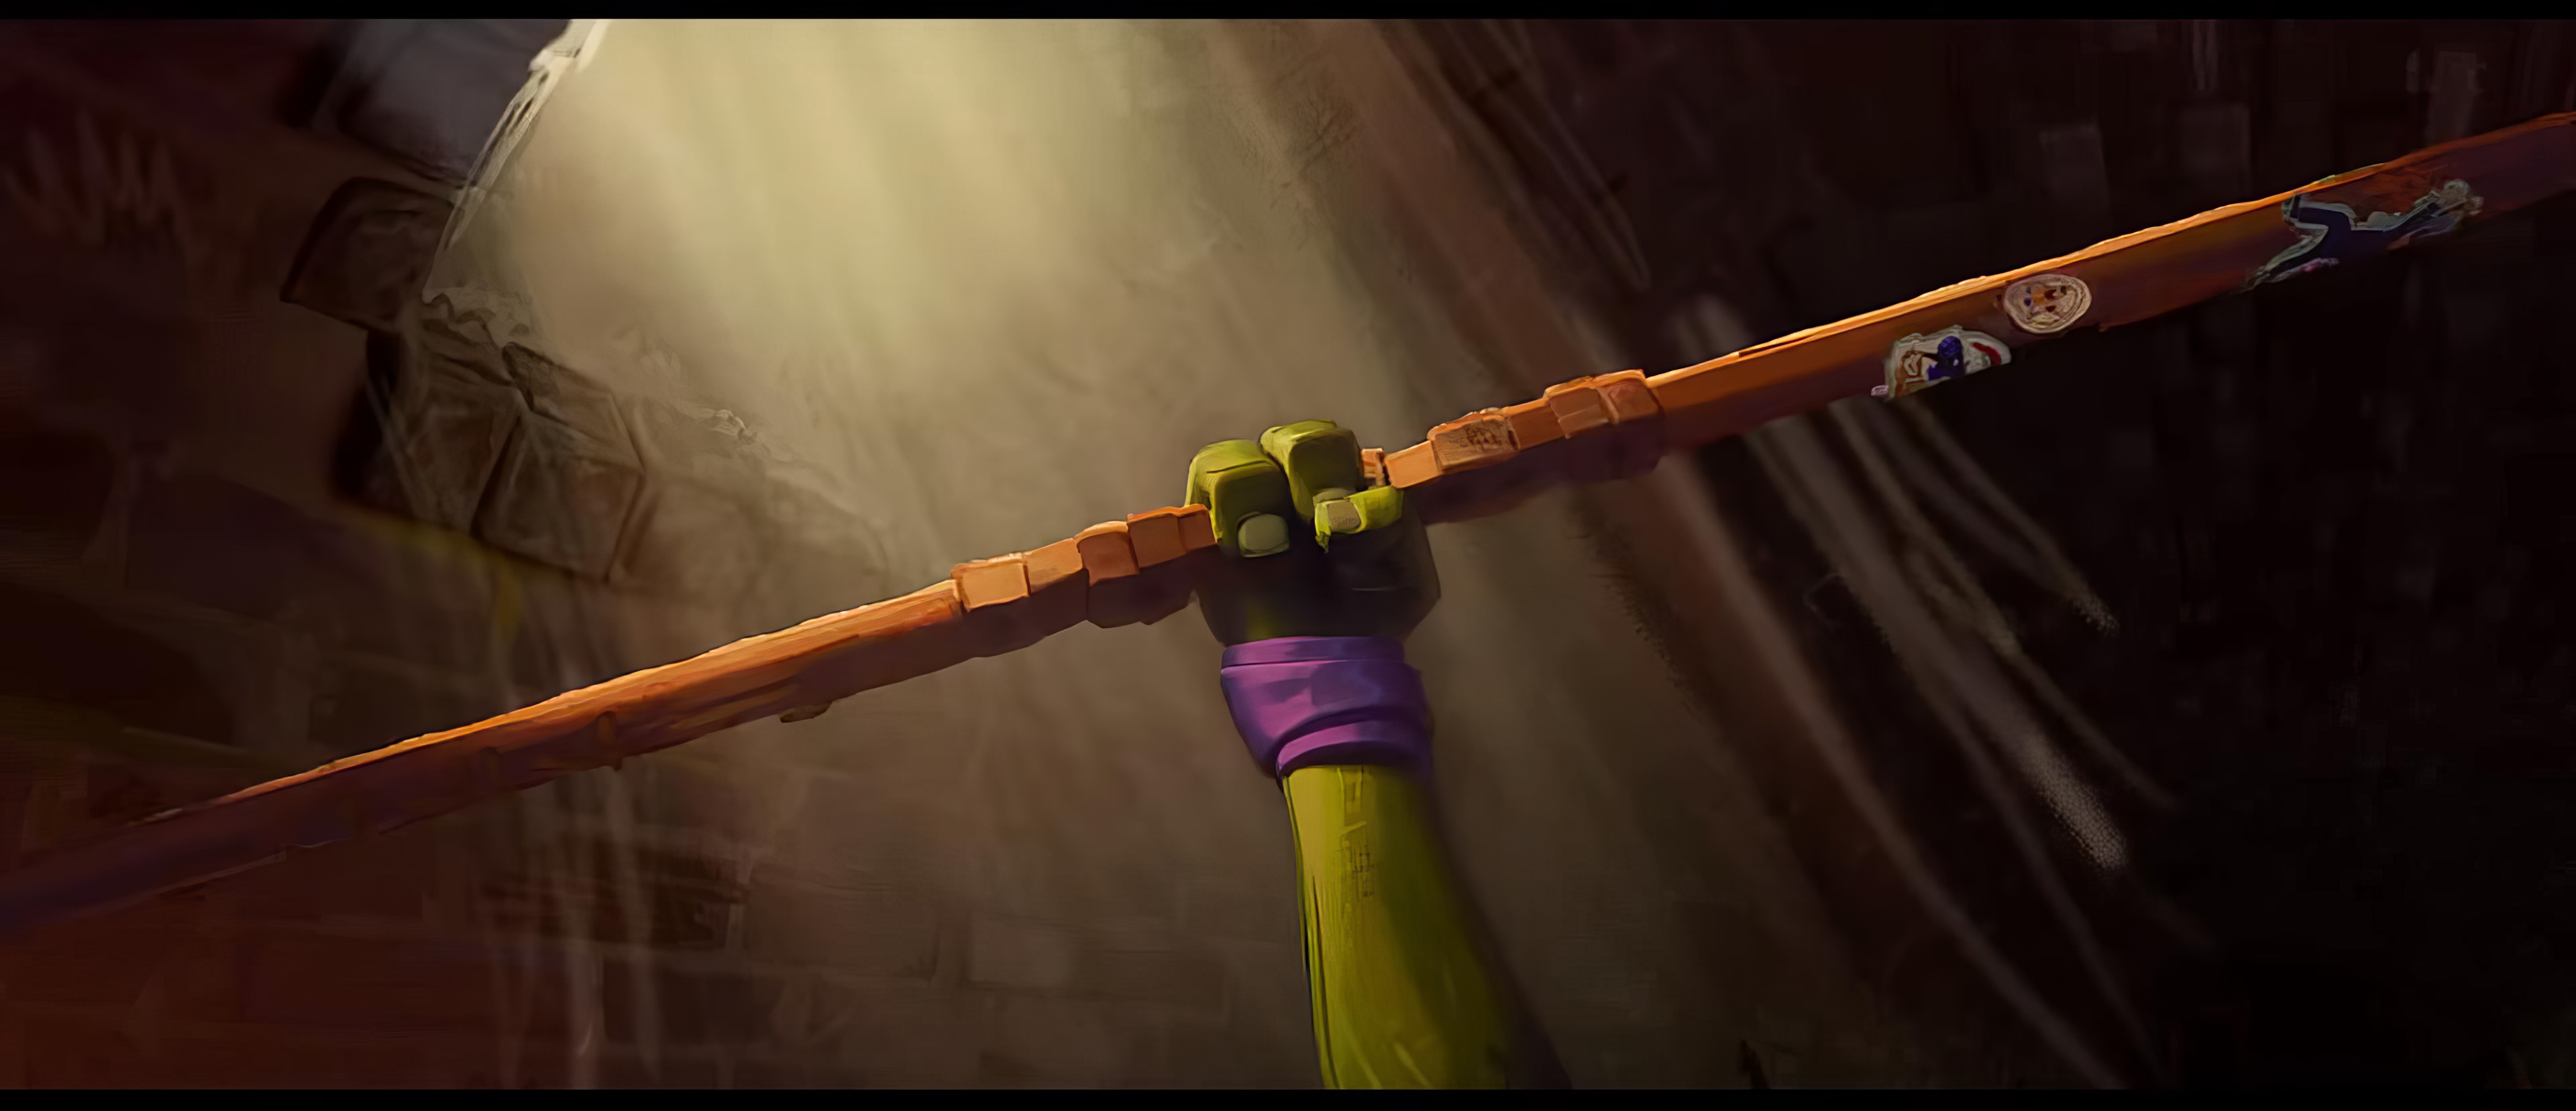 HD wallpaper of Teenage Mutant Ninja Turtles: Mutant Mayhem showcasing a detailed close-up of a ninja turtle's hand gripping their signature weapon, with a dramatic alleyway background.